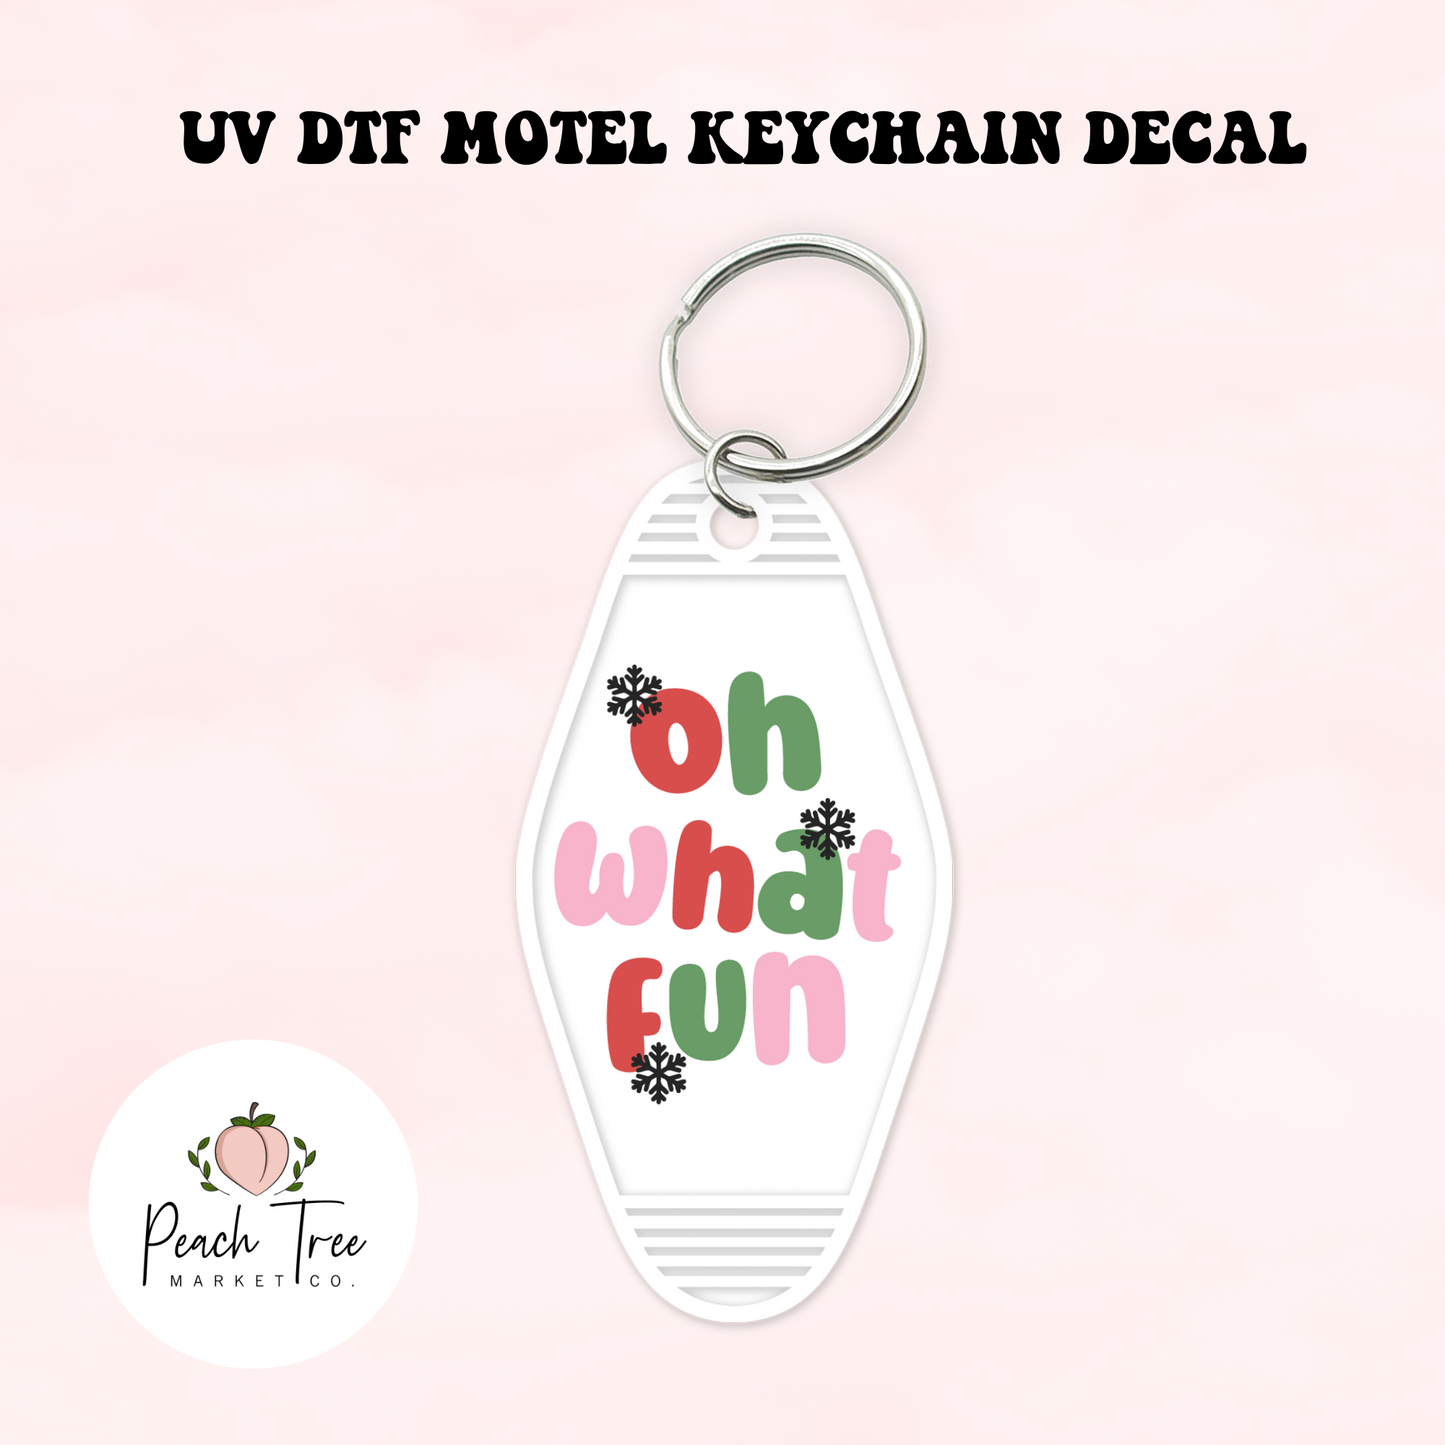 Oh What Fun UV DTF Motel Keychain Decal